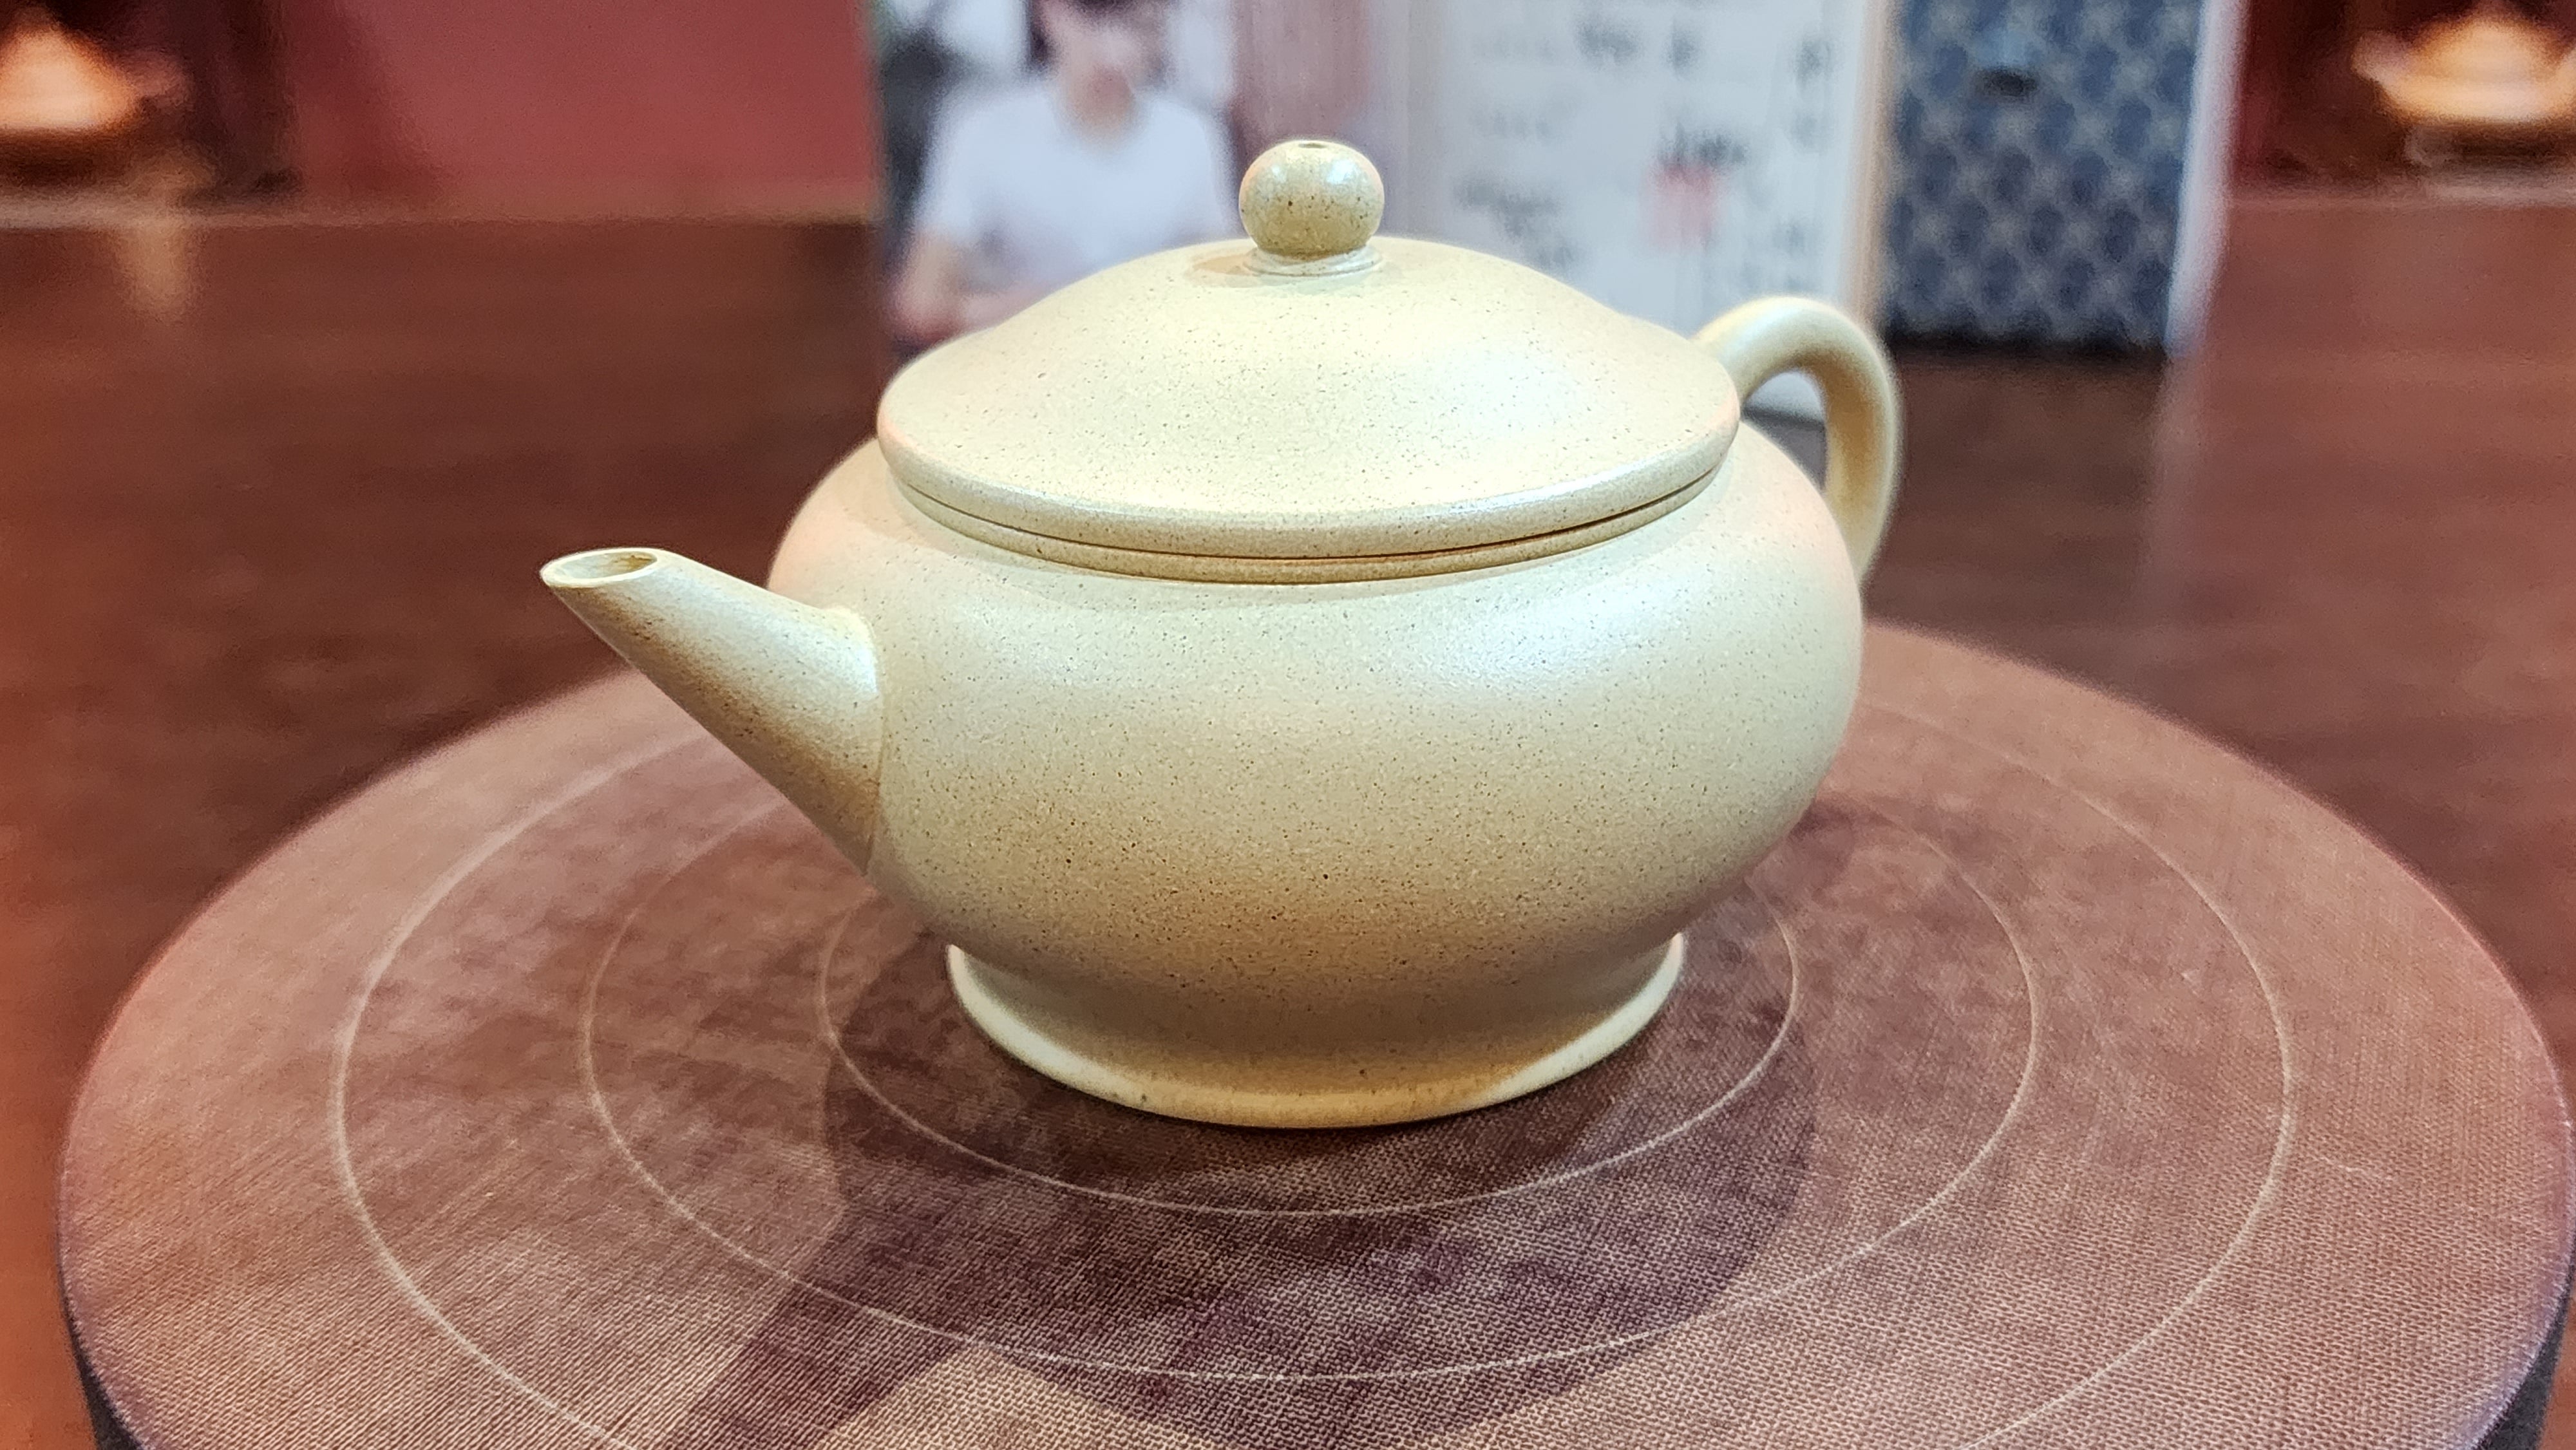 Shui Ping : Special : Exquisite *Thin-Walled*, 100% BenShan LüNi, SHUI PING Pot, 薄胎, 本山绿泥, 水平壶  made by L4 Assoc Master Artist Zhang Ke 助理工艺美术师, 张轲。- commissioned in Feb 2023 for our Italian Tea Master and Professor at University of Milan.